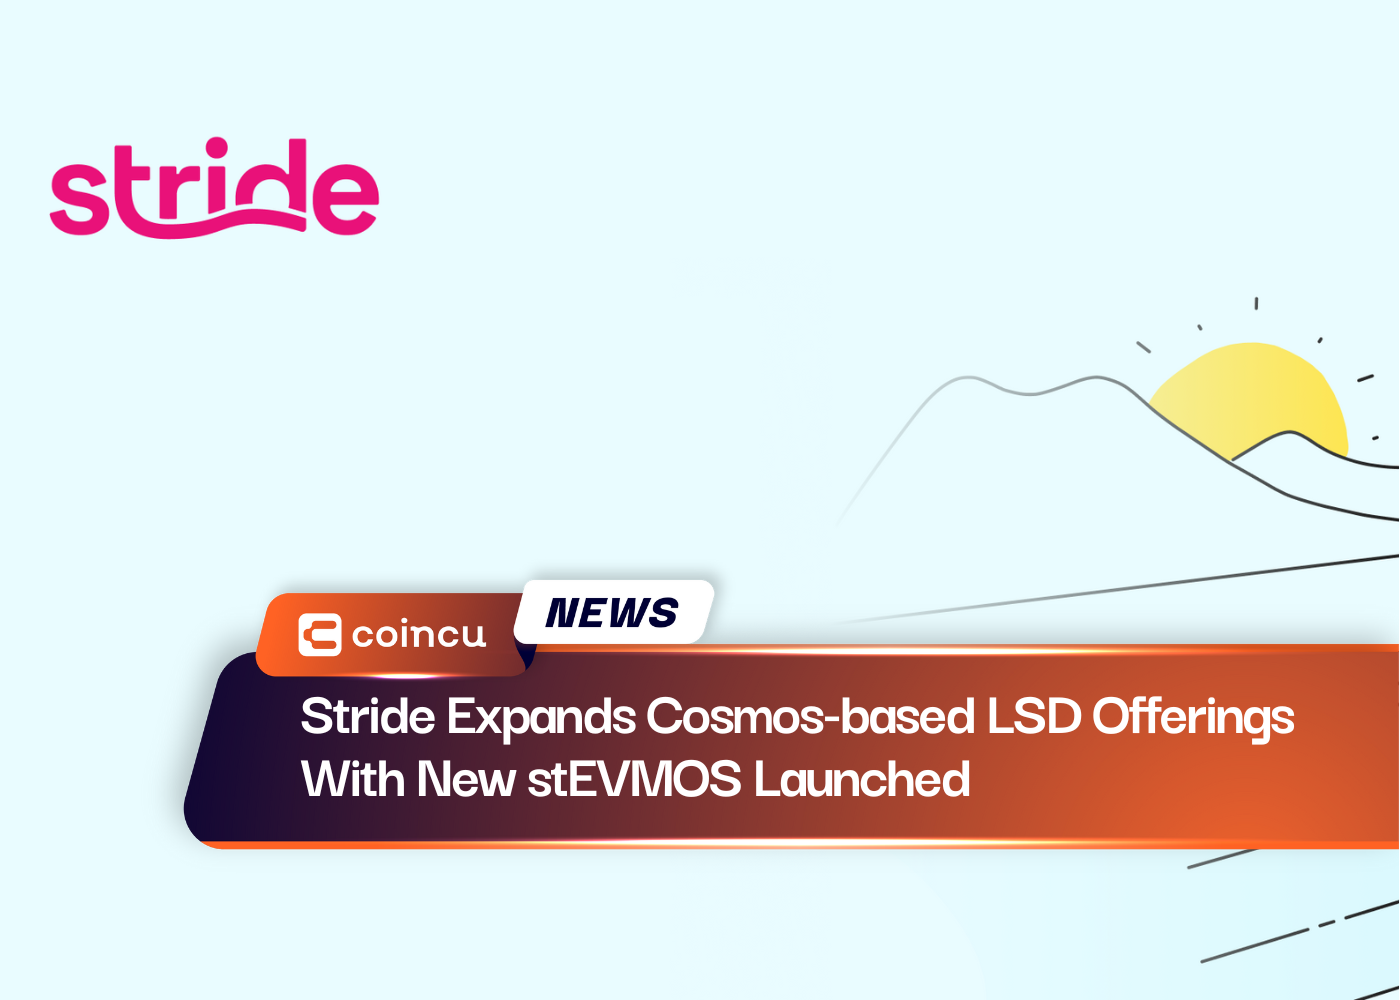 Stride Expands Cosmos-based LSD Offerings With New stEVMOS Launched